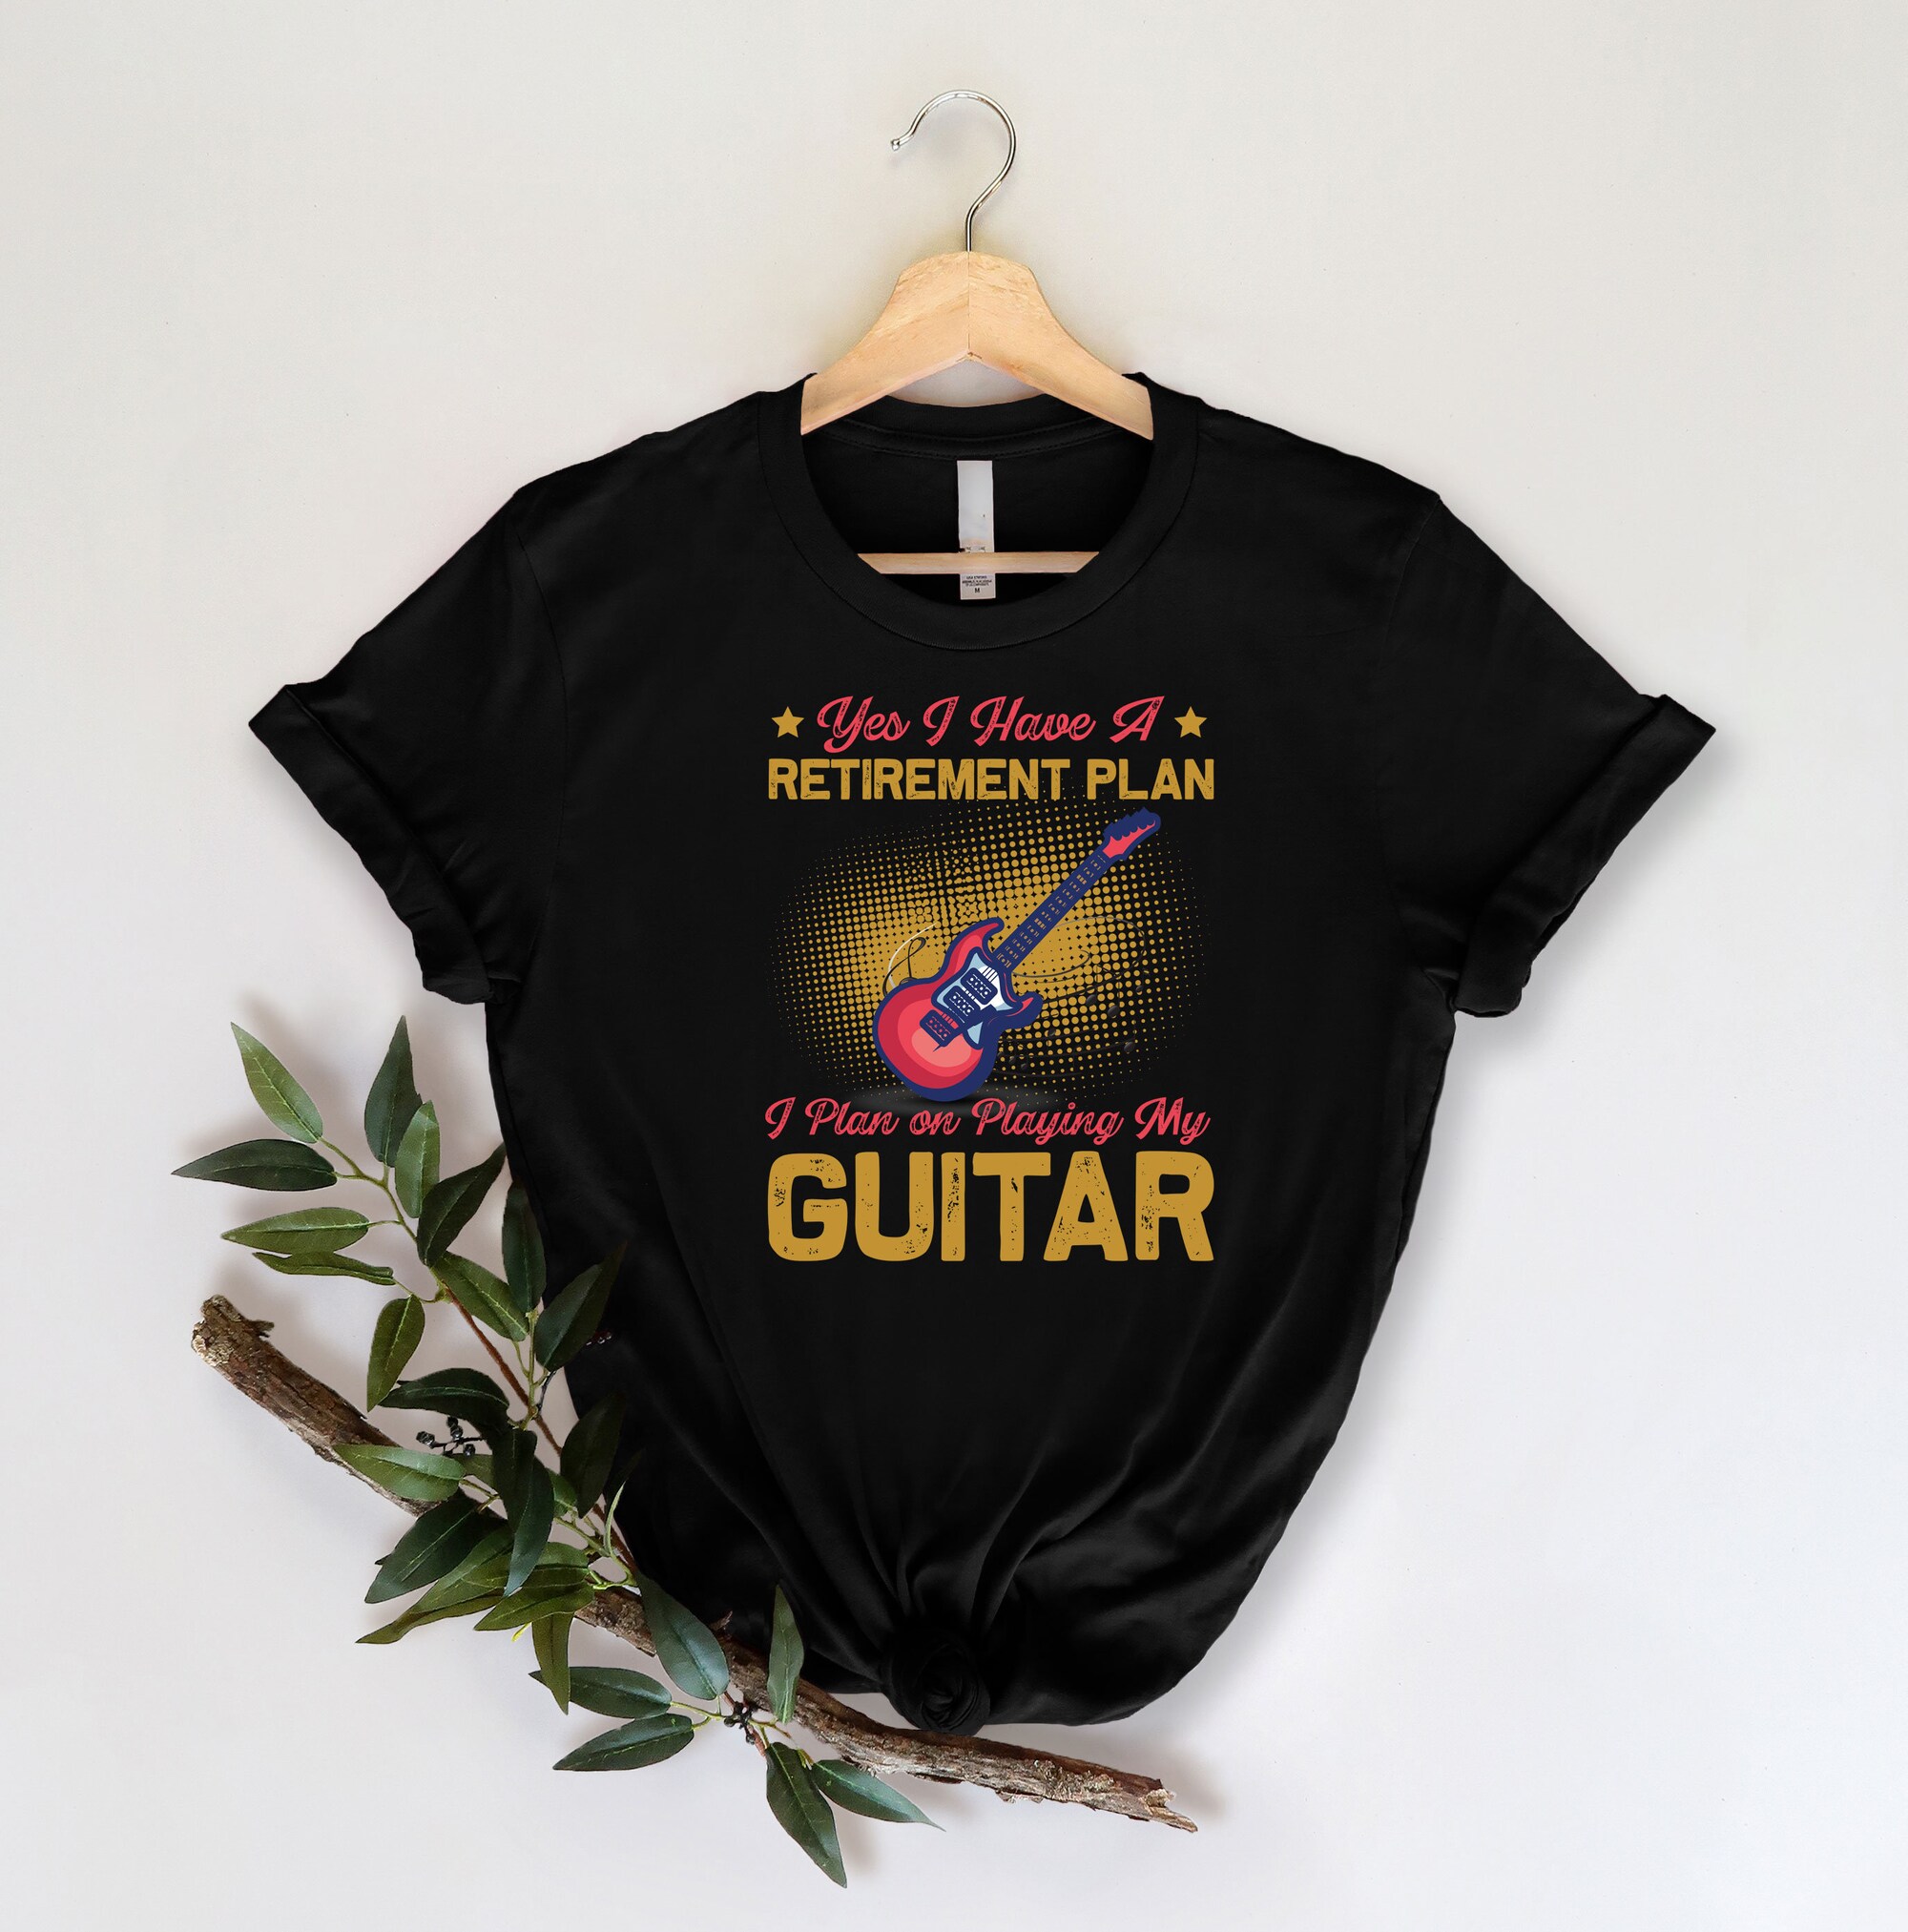 Discover Yes I Have A Retirement Plan I Plan On Playing My Guitar Shirt, Music Shirt, Guitar Lover Shirt, Gift For Guitarist, Retirement Shirt